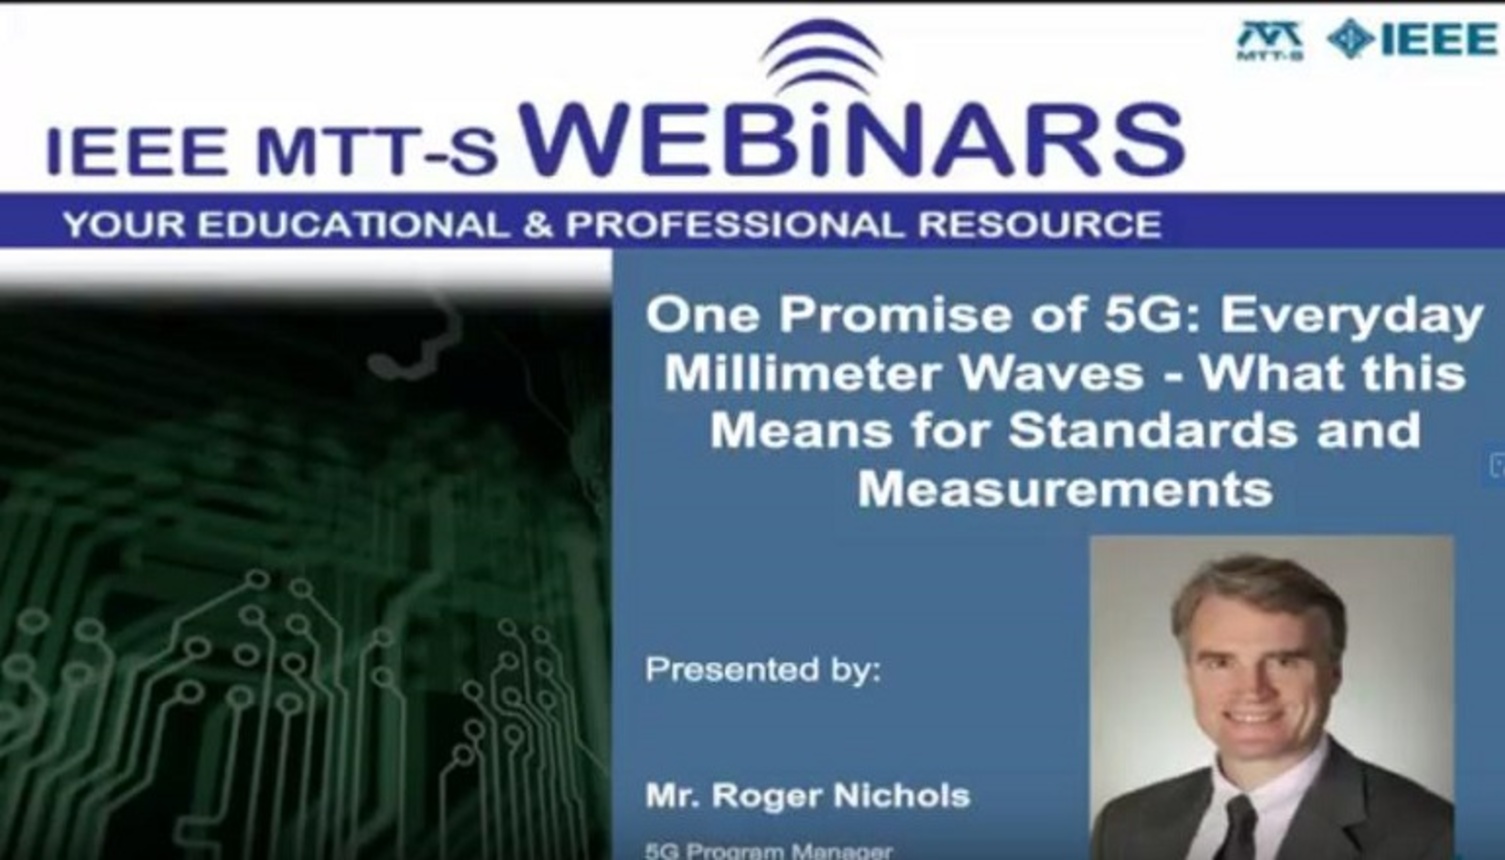 One Promise of 5G: Everyday Millimeter Waves: What This Means for Standards and Measurements Video